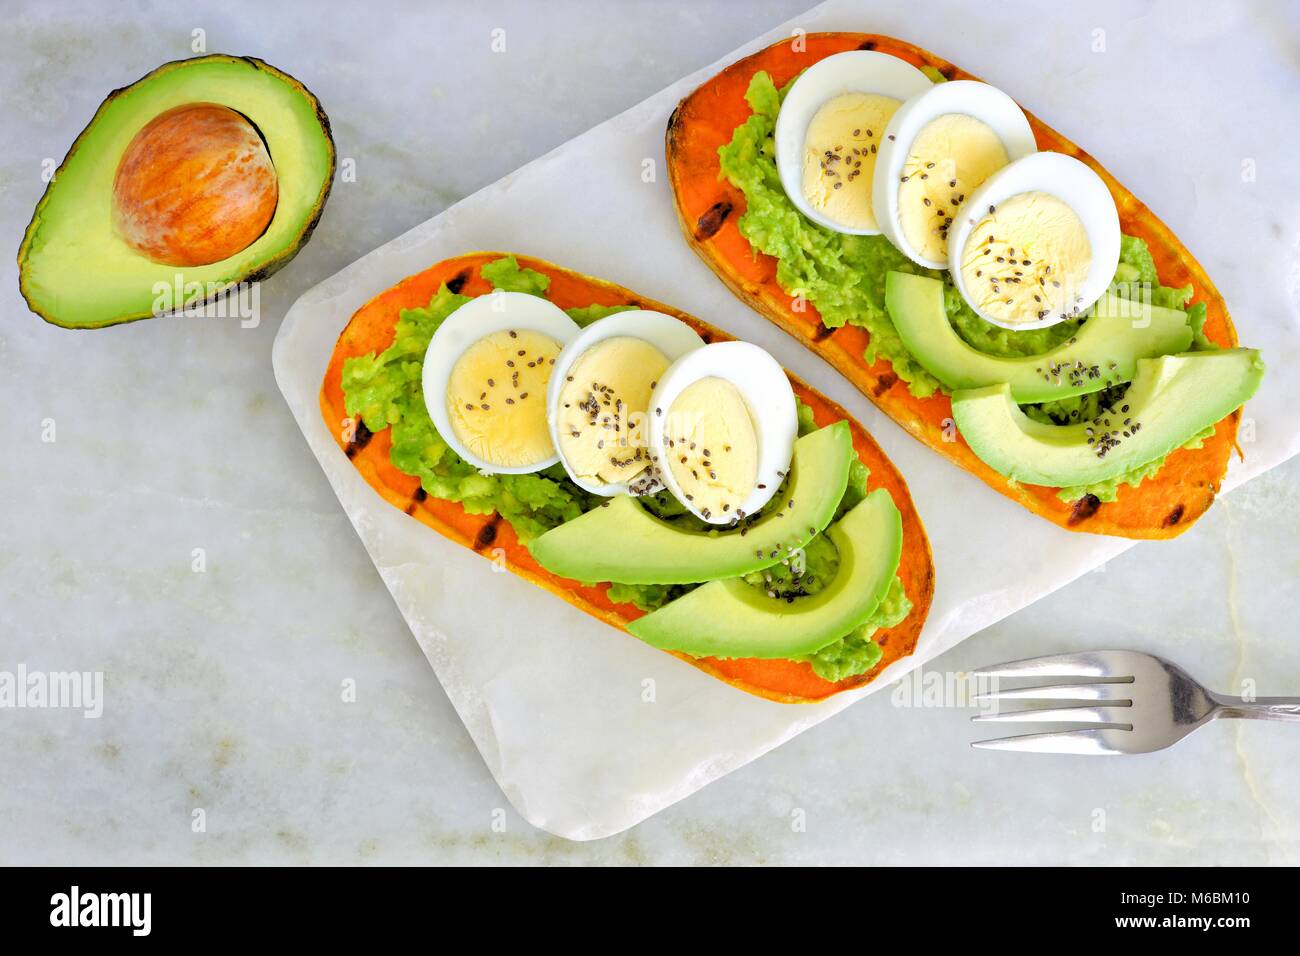 Sweet potato toasts with avocado, eggs and chia seeds on a marble server. Top view on a bright background. Stock Photo